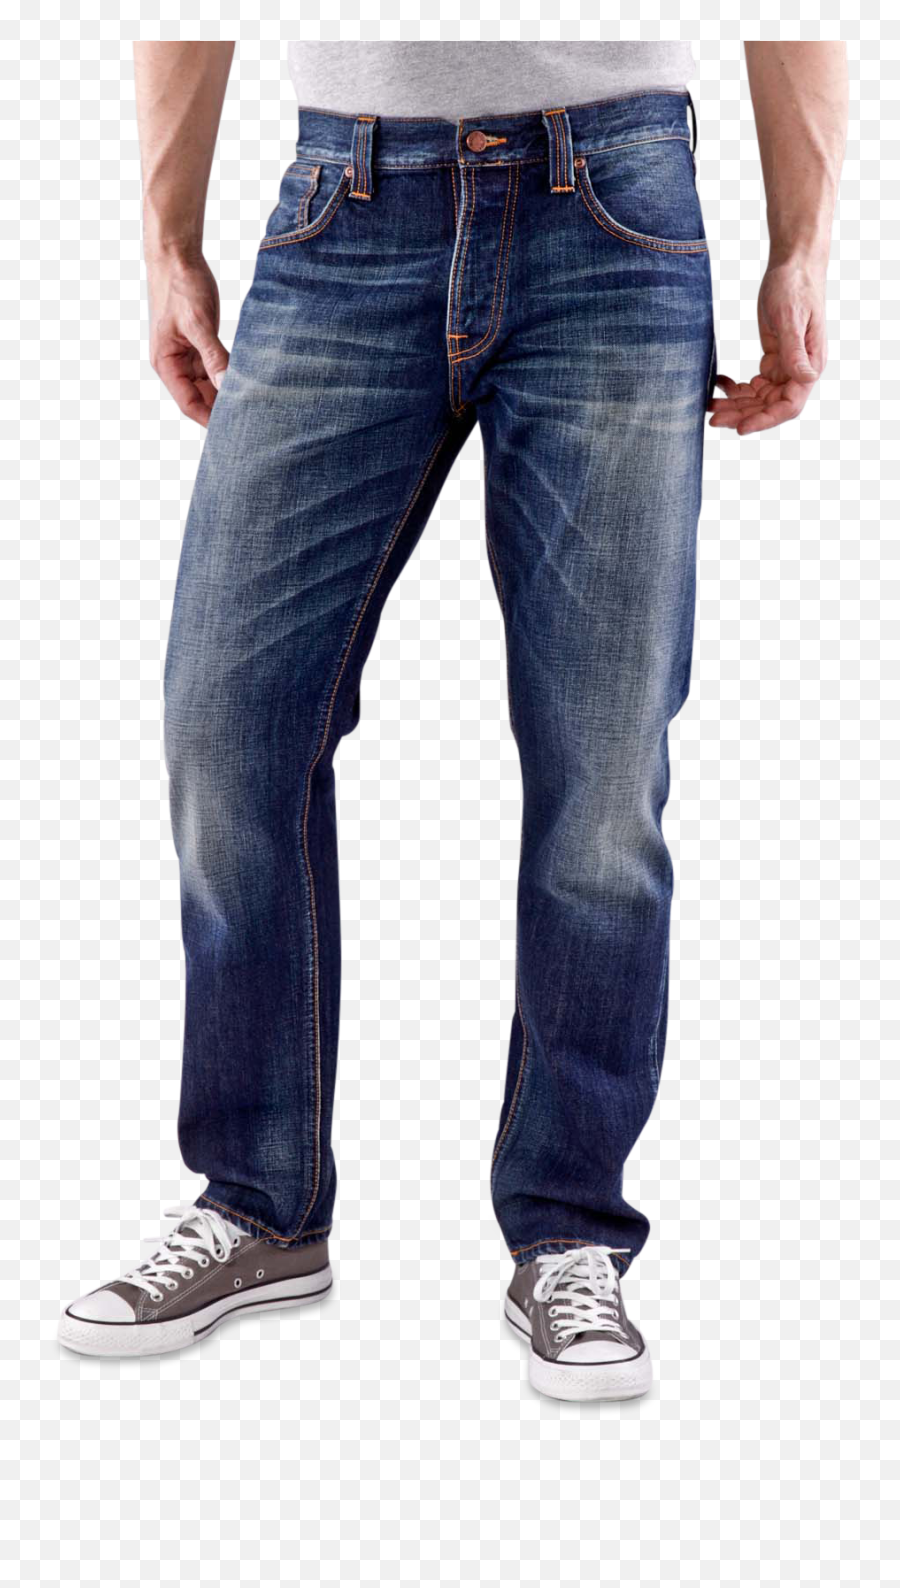 Jeans Png Hd - Clip Art Library Man With Jeans Png Emoji,Jeans Emoji